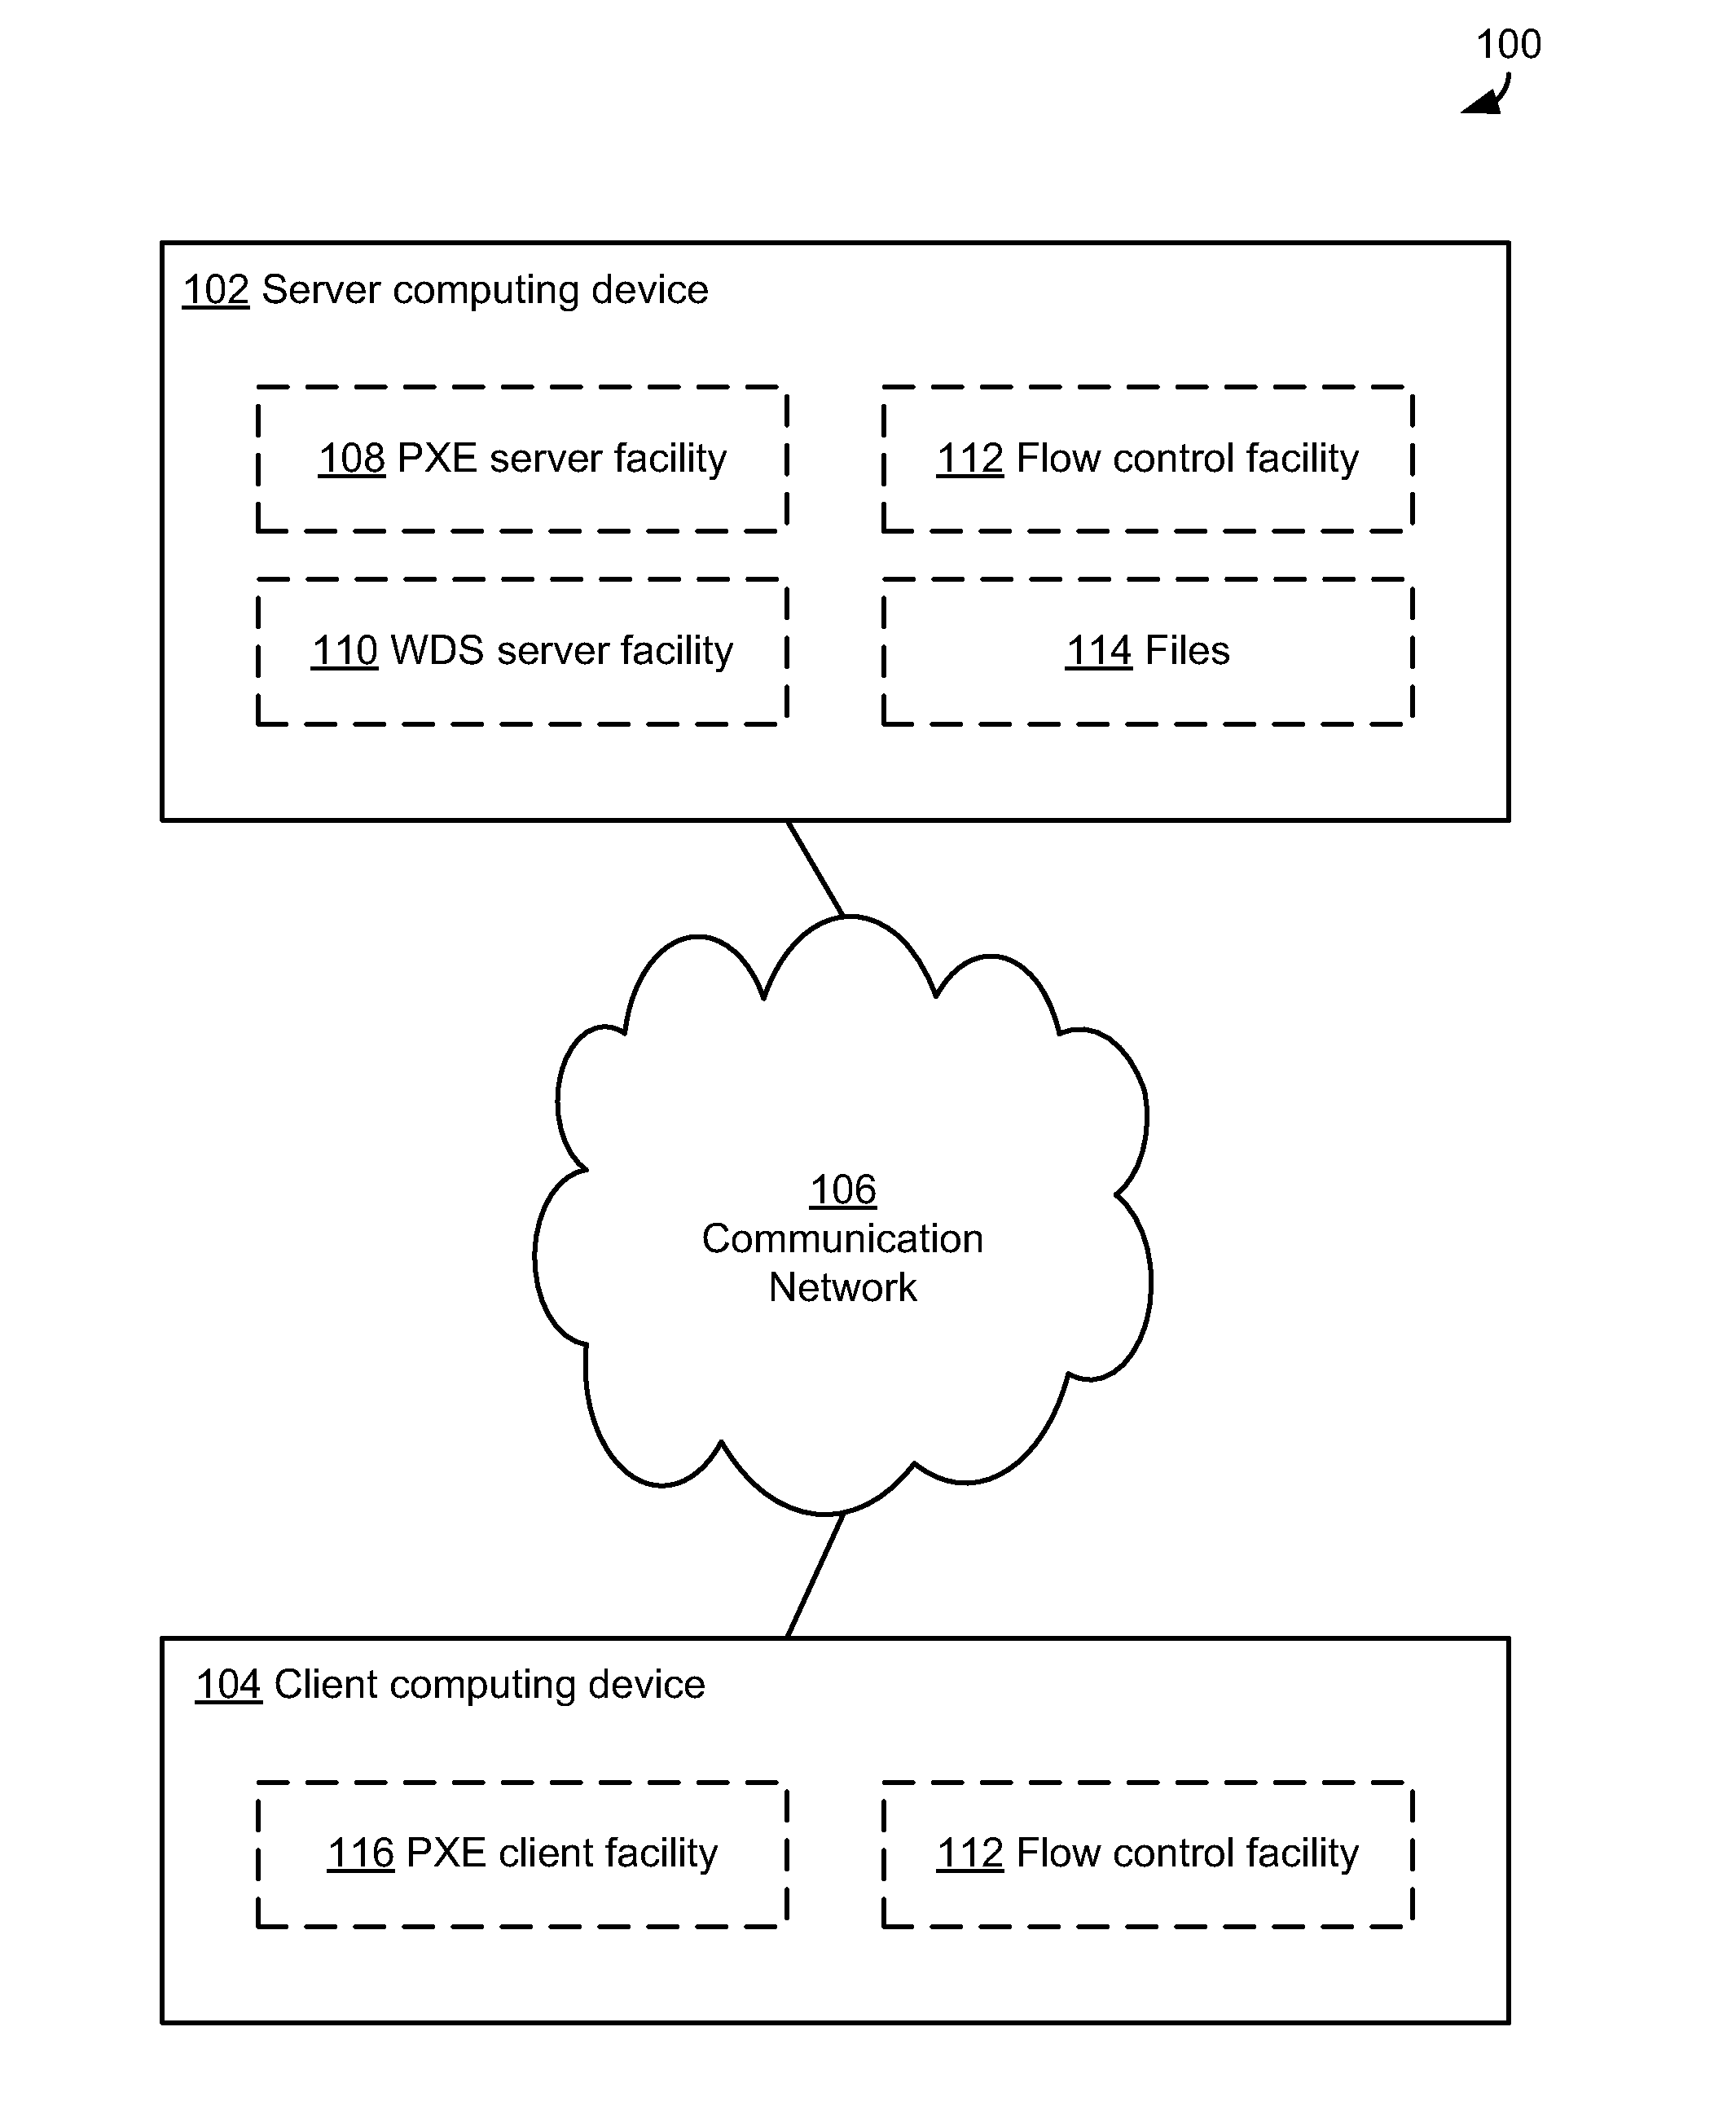 Client-adjustable window size for connectionless transfer protocols